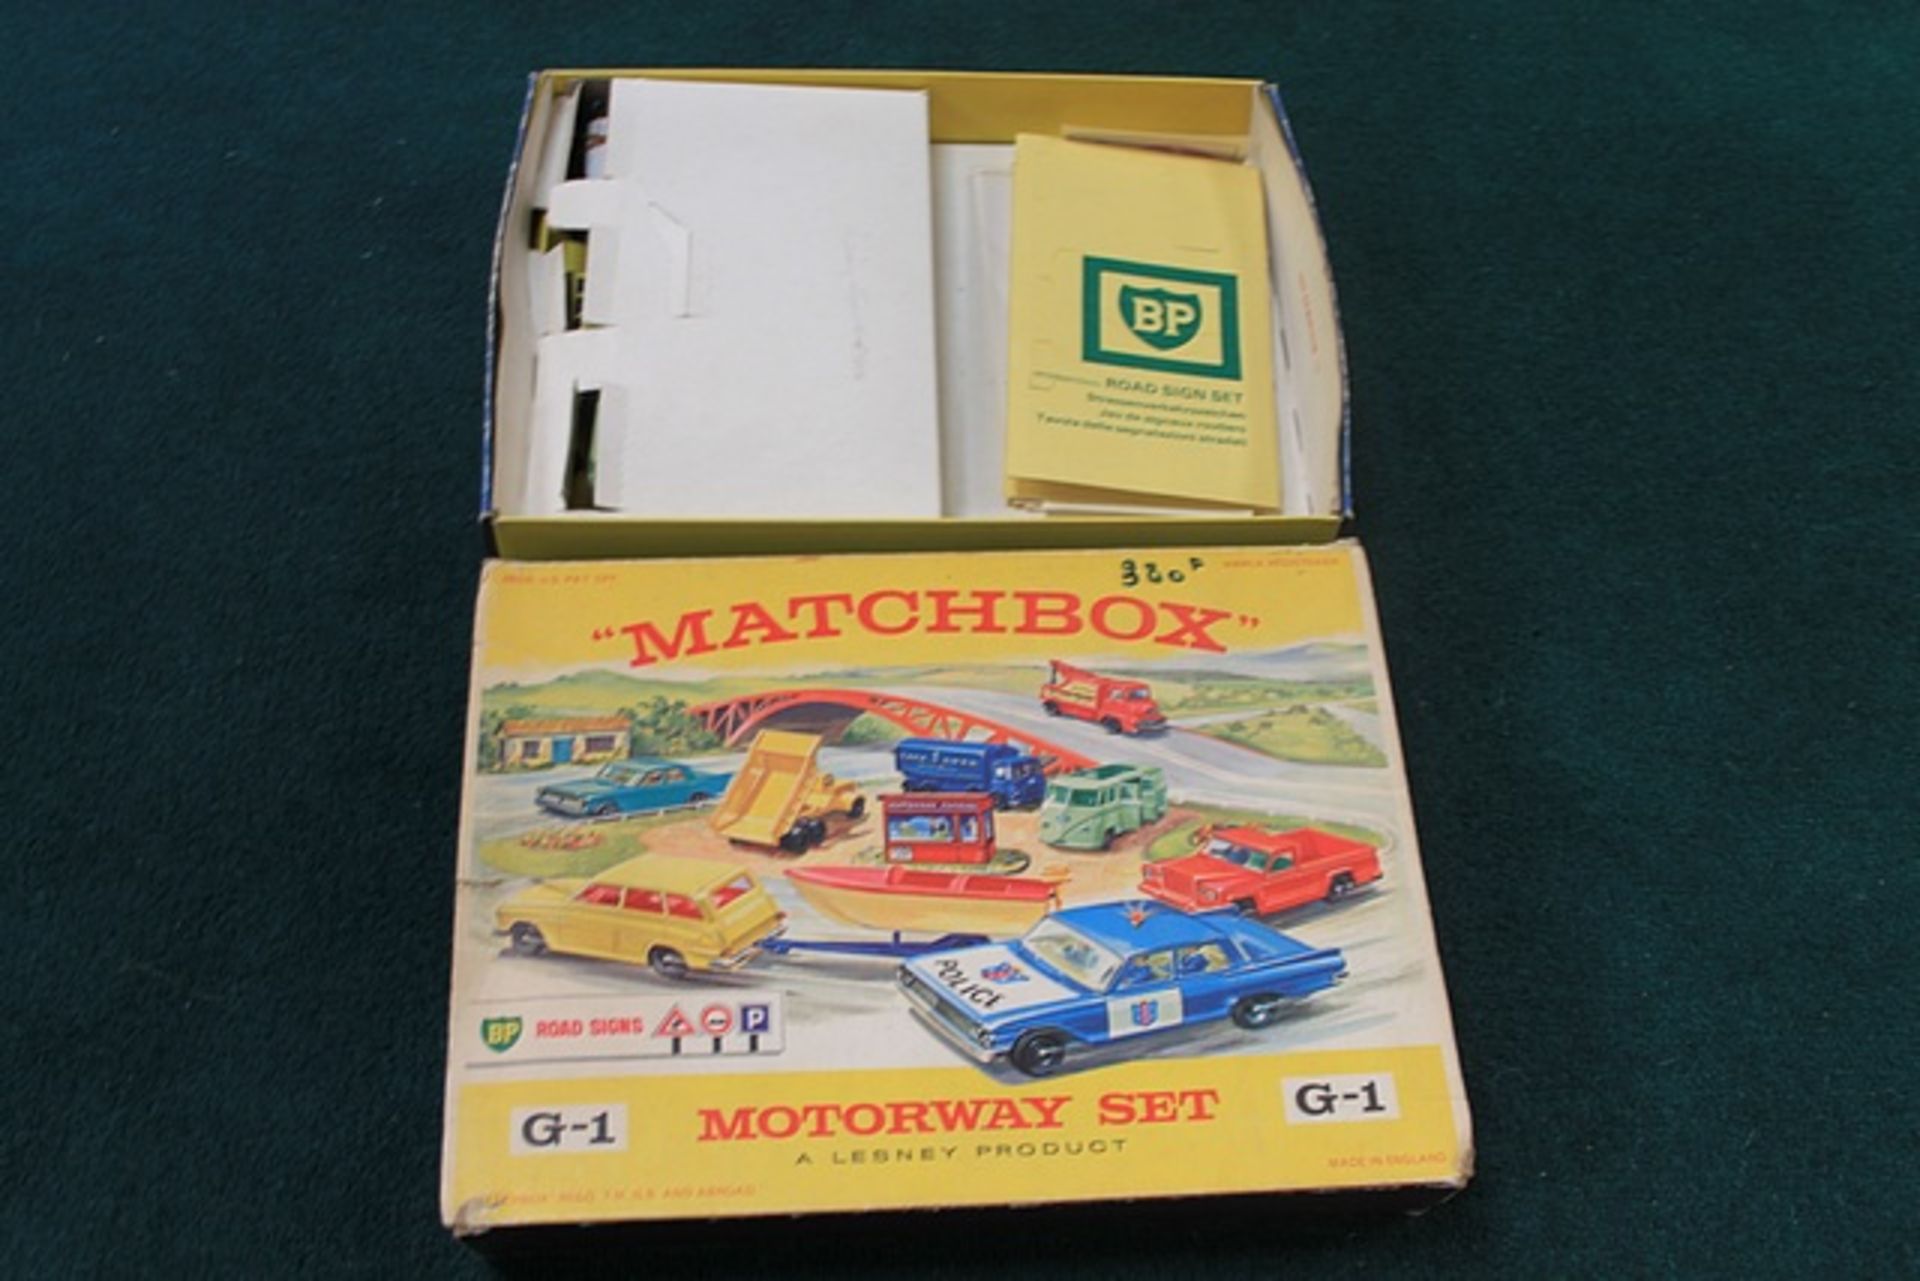 Matchbox Lesney Gift Set Motorway Set Number G-1 Comprising Of 8 Diecast Vehicles And A Boat - Image 3 of 4